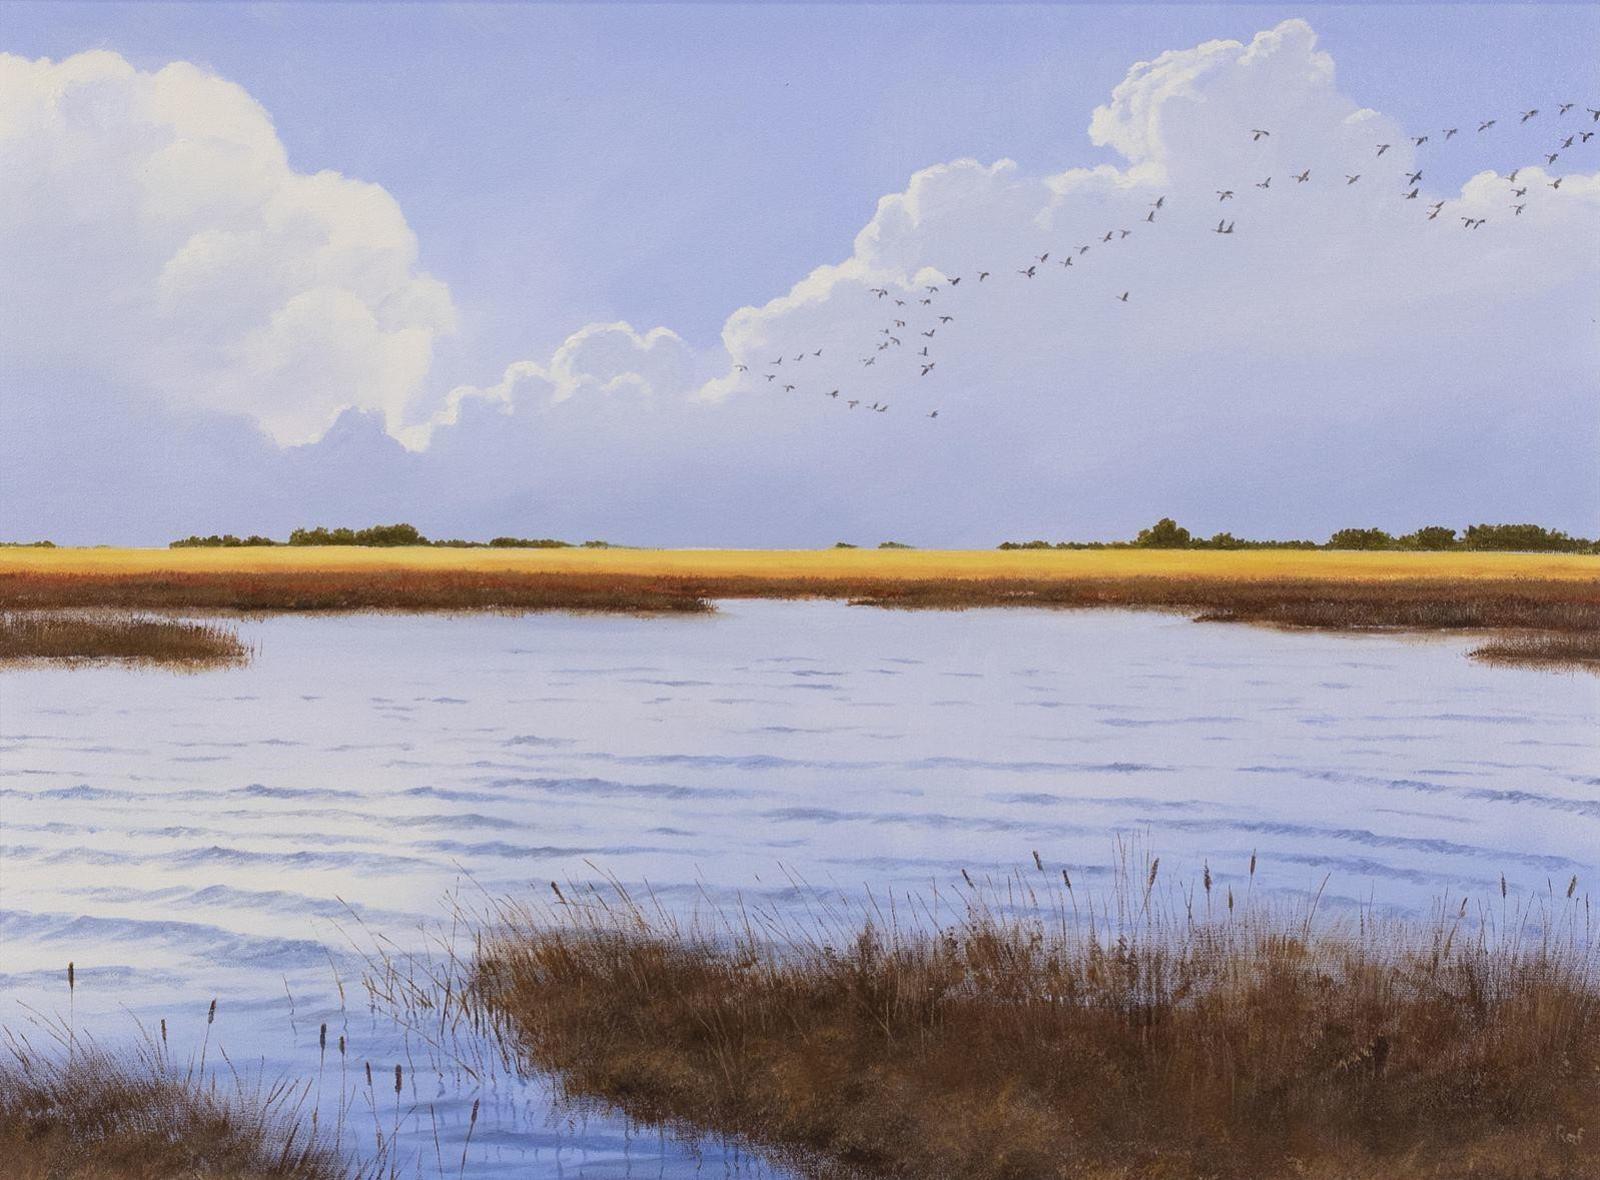 Ted Raftery (1938) - Incoming Geese